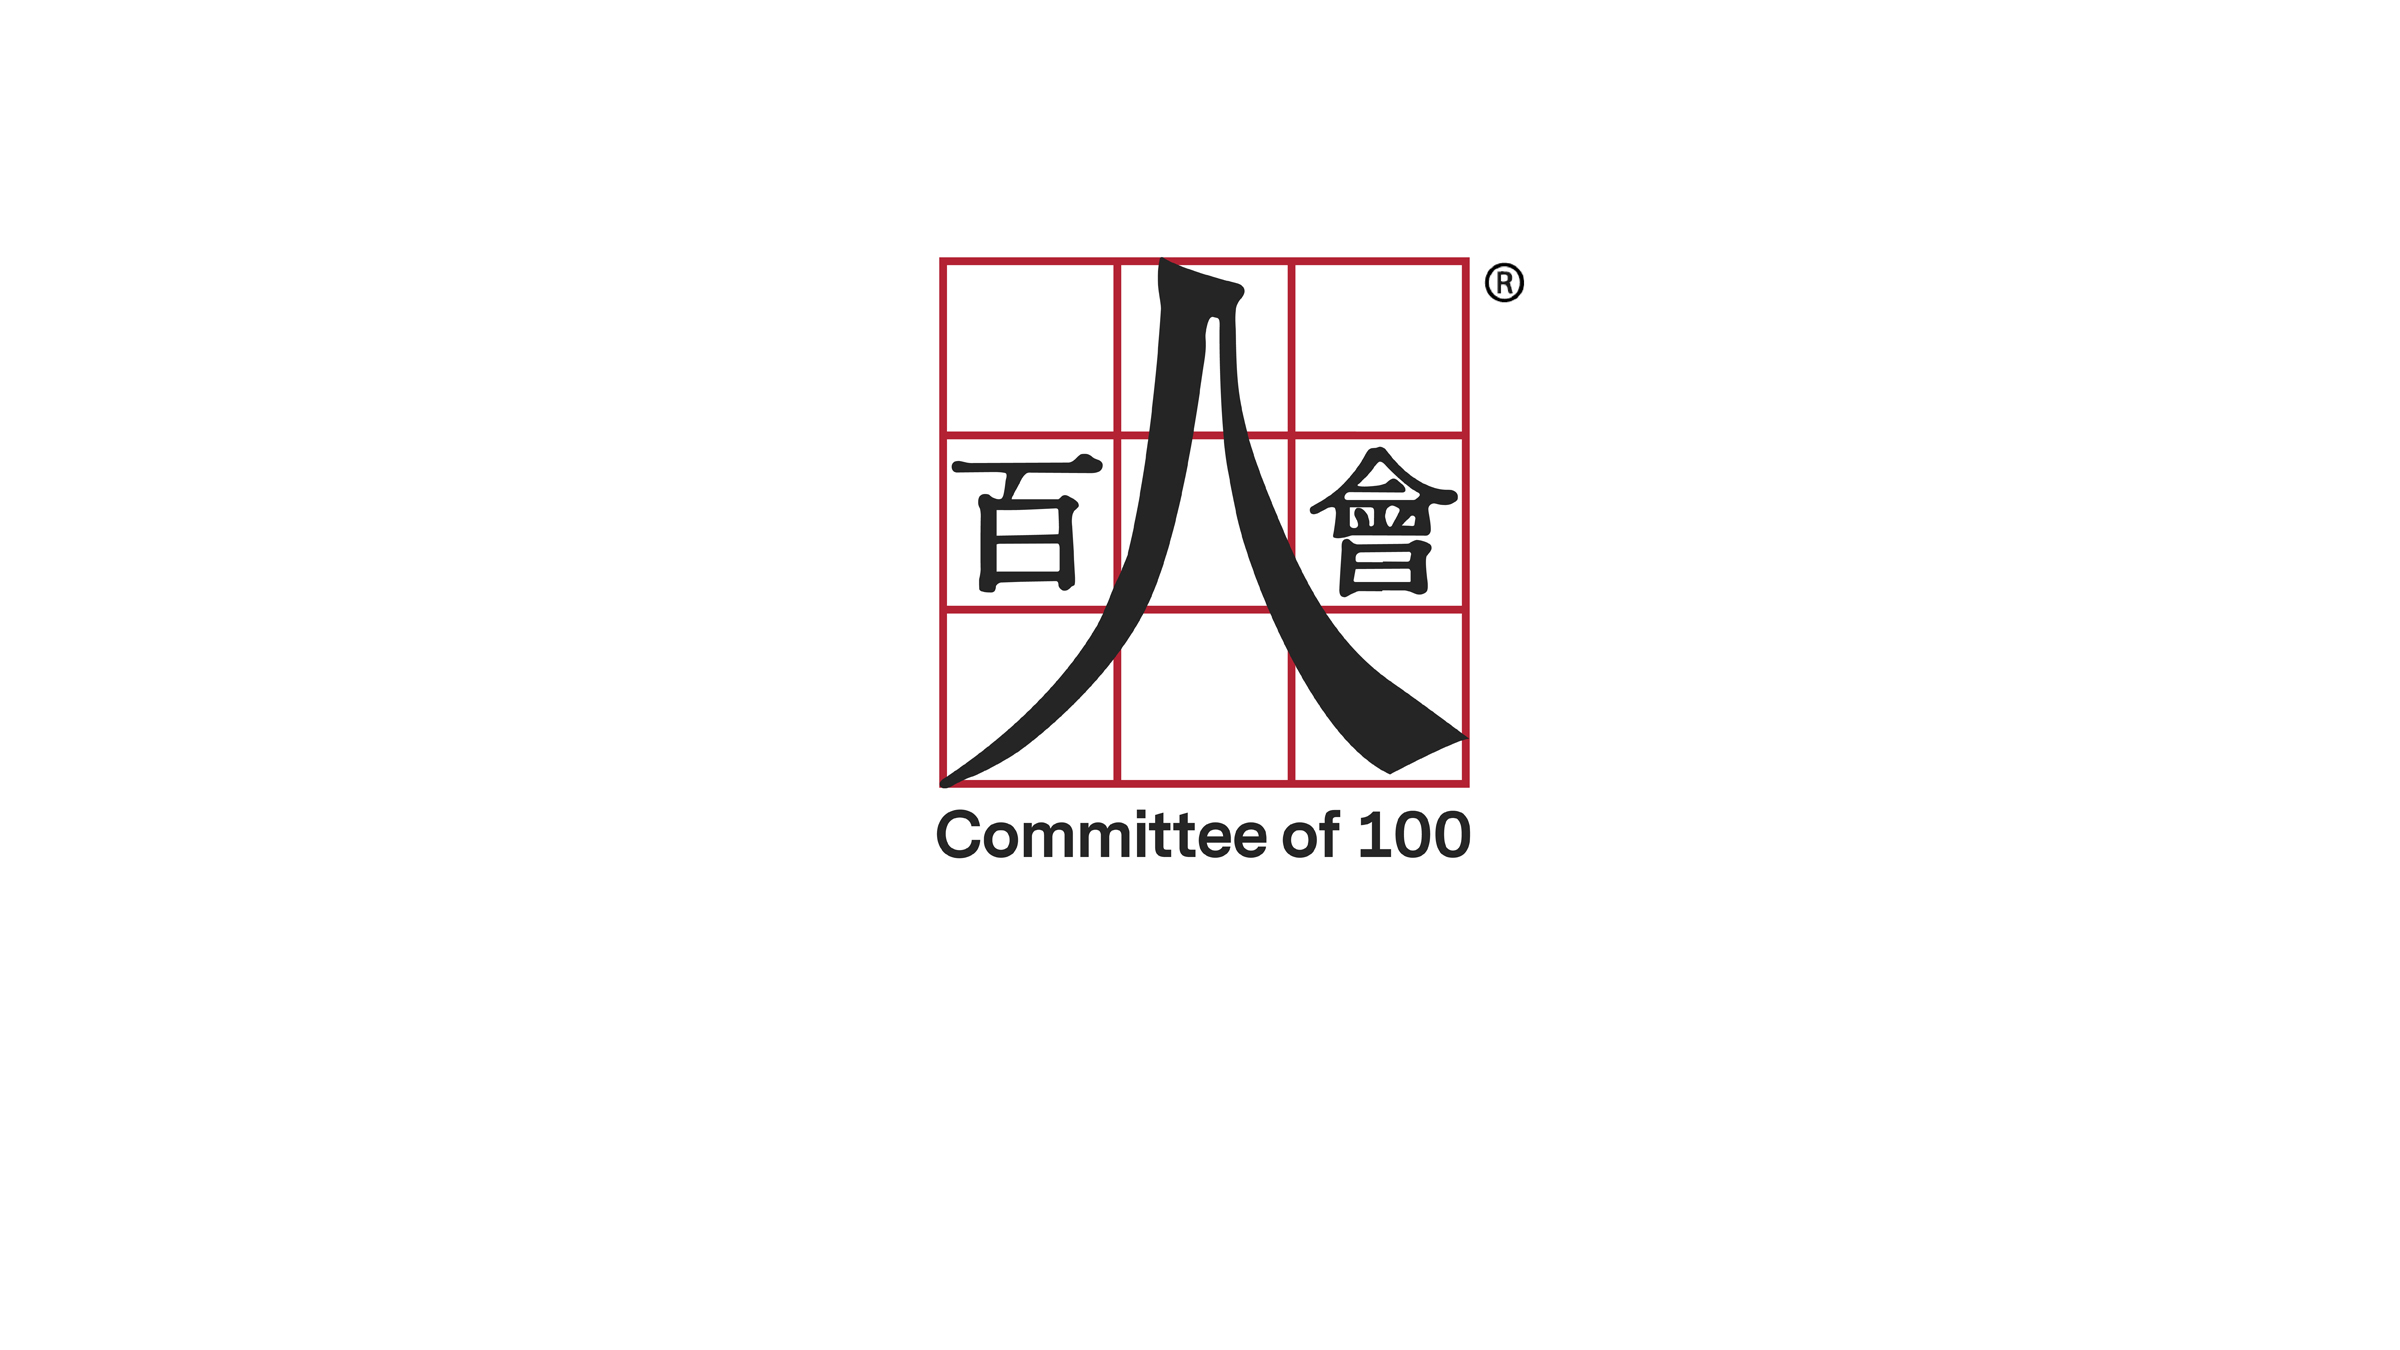 Committee of 100 Statement on the Recent Meeting Between Former U.S. Secretary of State Dr. Henry Kissinger and China President Xi Jinping